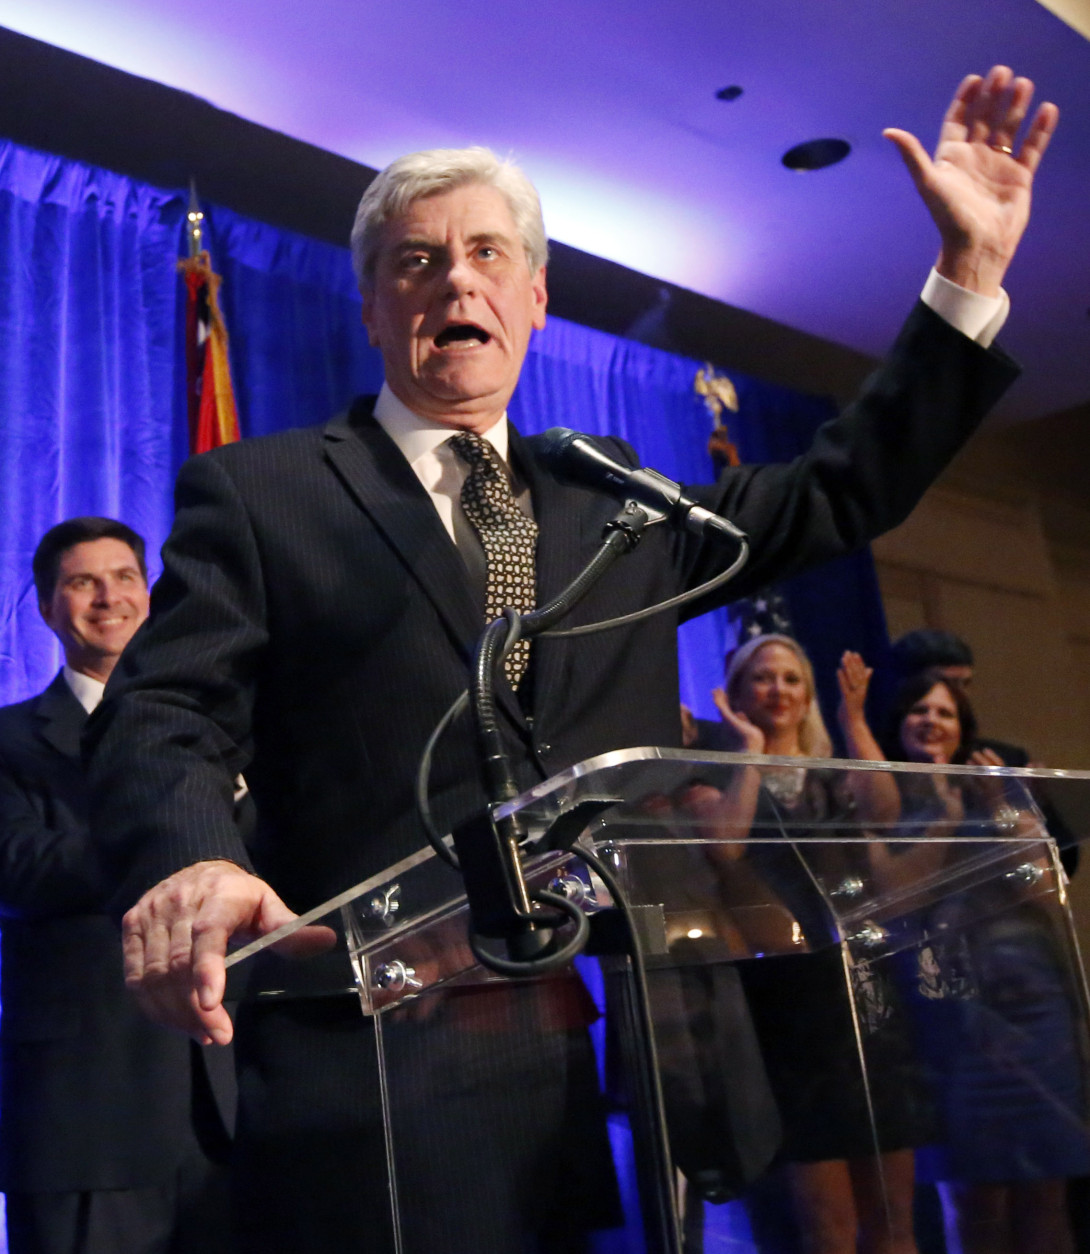 Republican Gov. Phil Bryant speaks to friends and supporters after he is elected to his second term, Tuesday, Nov. 3, 2015 in Jackson, Miss. (AP Photo/Rogelio V. Solis)